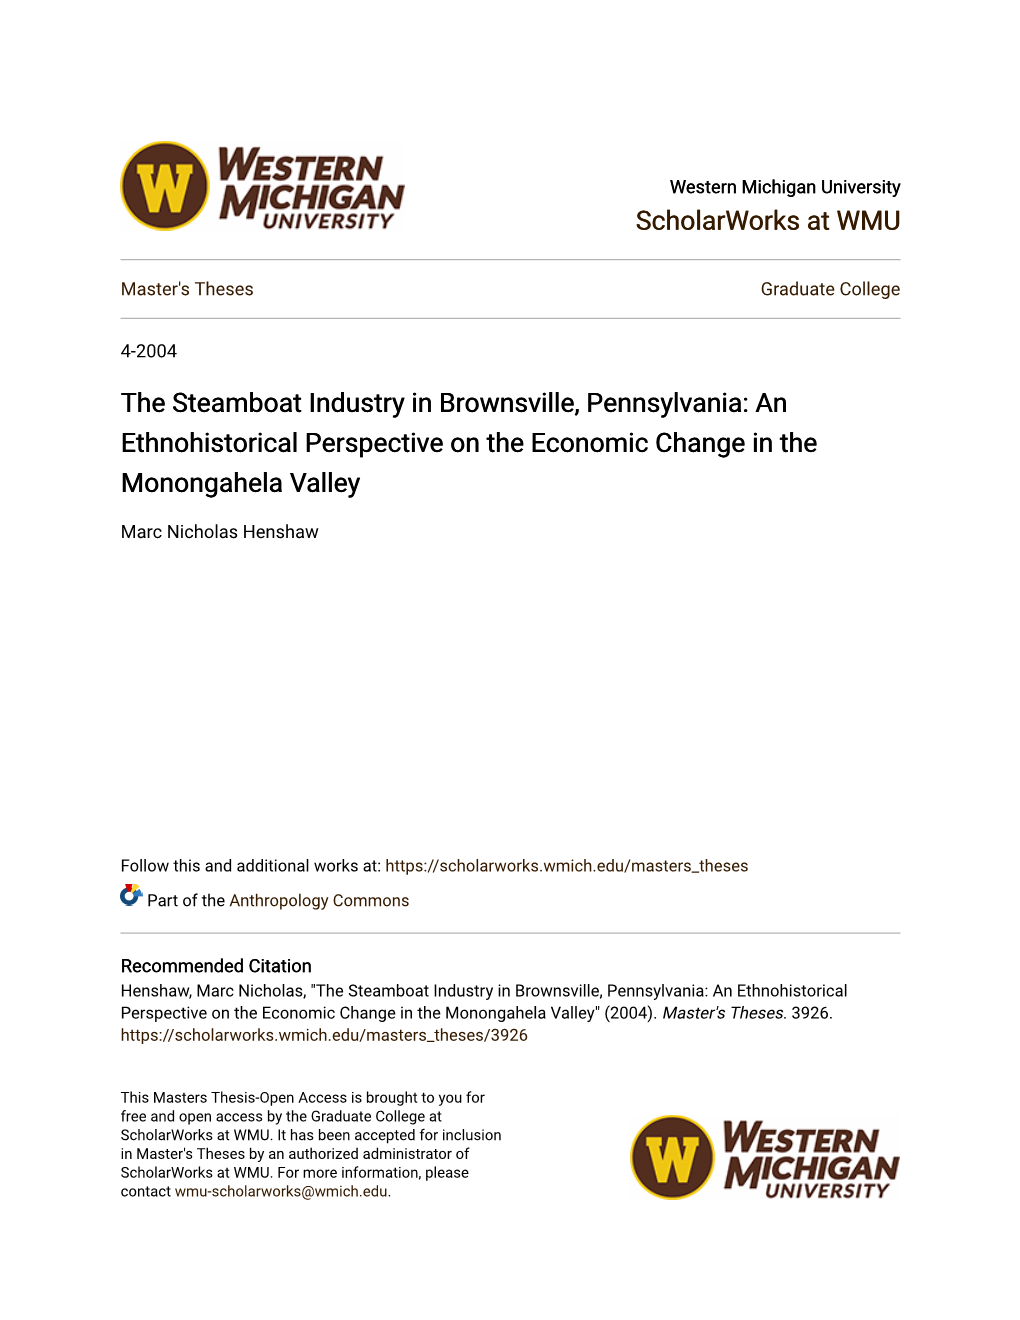 The Steamboat Industry in Brownsville, Pennsylvania: an Ethnohistorical Perspective on the Economic Change in the Monongahela Valley